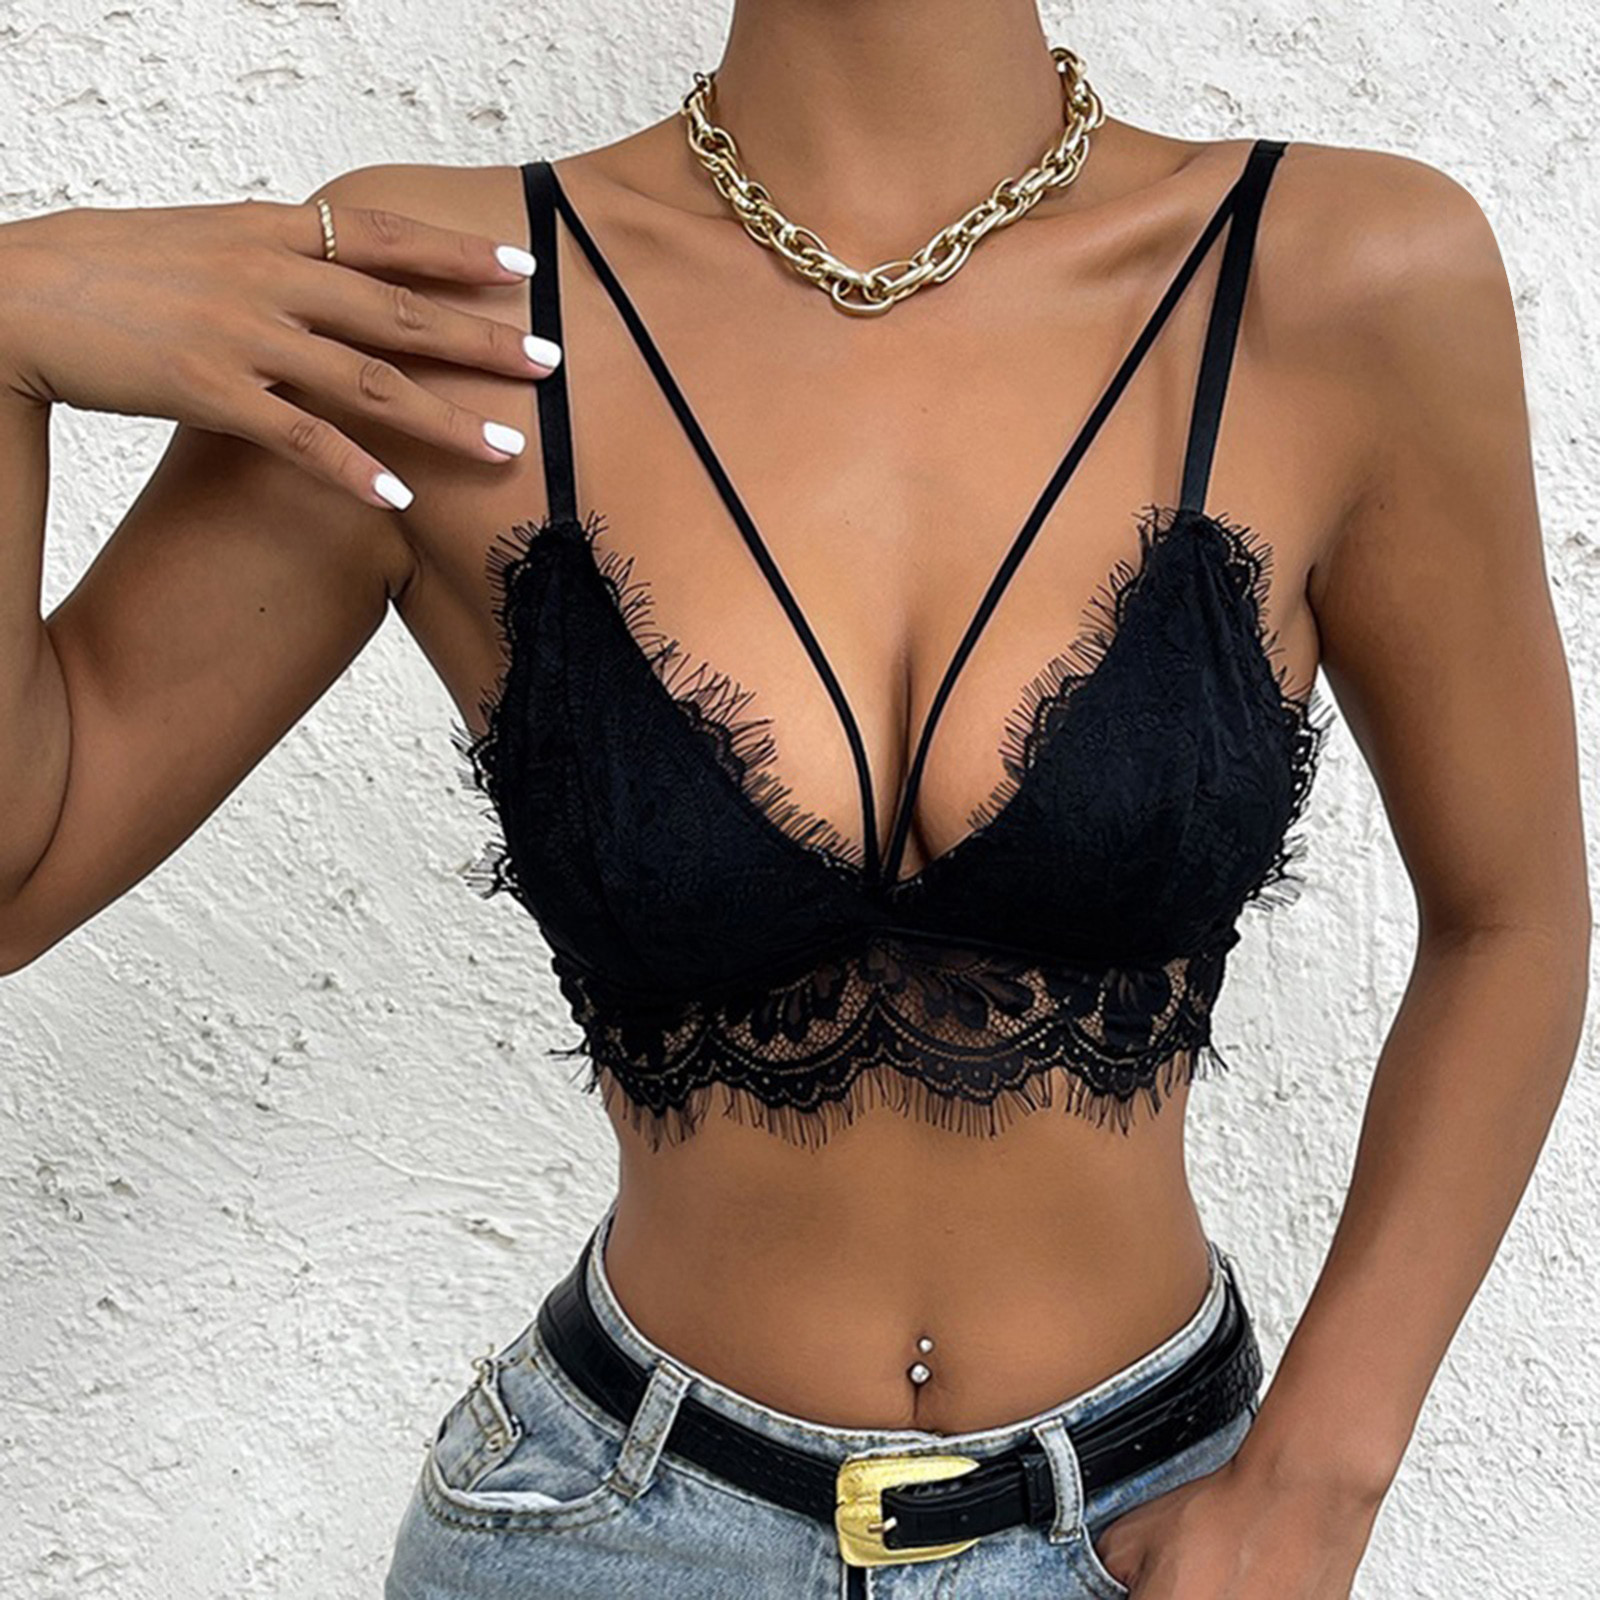 40 Lace Bralette Women Lingerie Backless Top Floral Small Breasts Bustier  Push Up Bra Small Girls Beautiful Underwearb